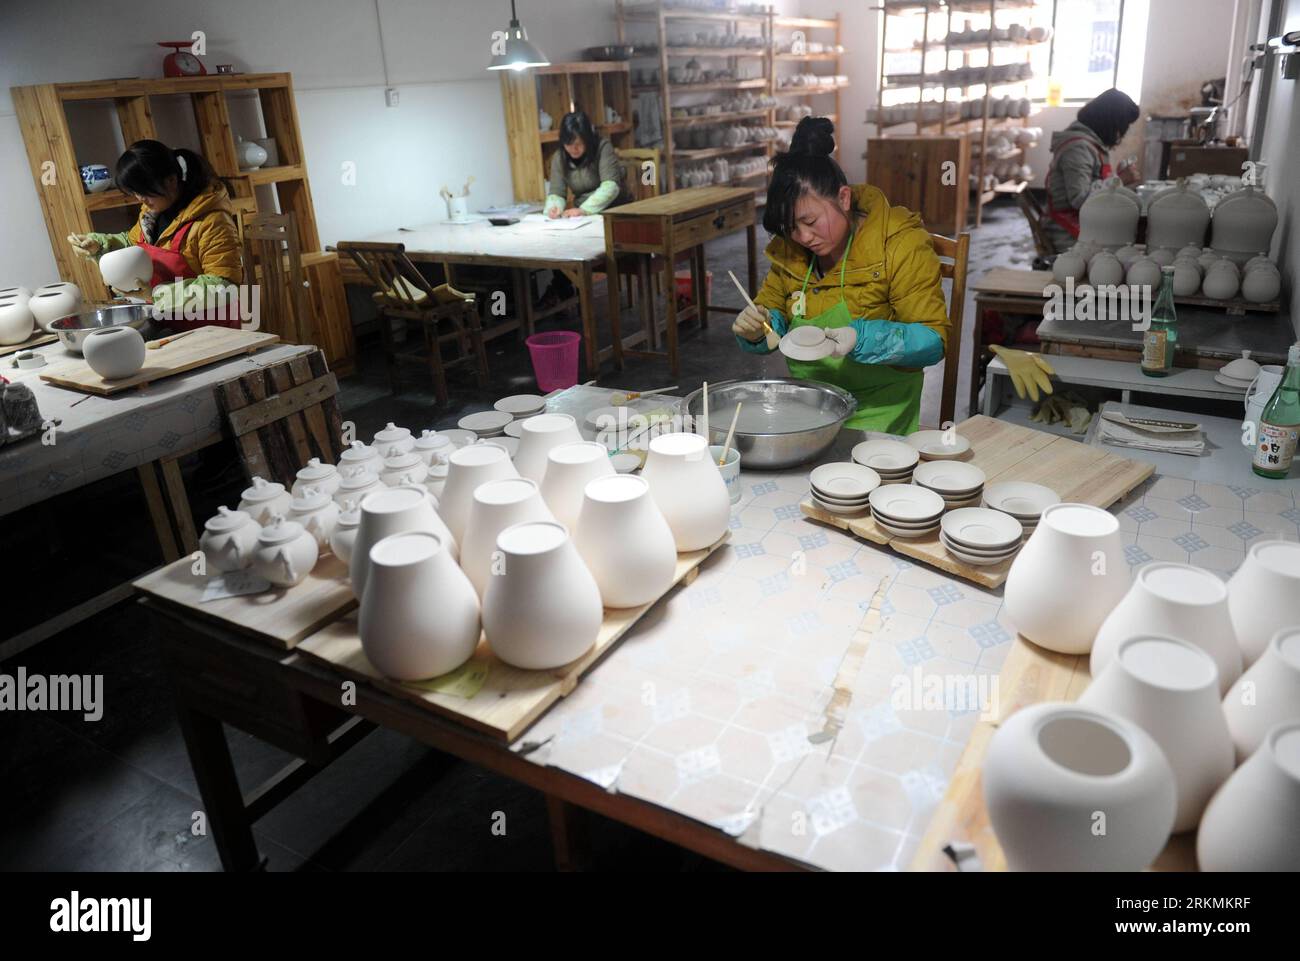 Bildnummer: 56778409  Datum: 21.12.2011  Copyright: imago/Xinhua (111223) -- JINGDEZHEN, Dec. 23, 2011 (Xinhua) -- A technician works on an adobe at a procelain workshop in Porcelain Capital Jingdezhen City, east China s Jiangxi Province, Dec. 21, 2011. Jingdezhen s percelain has been famous not only in China but in time it became known internationally for being as thin as paper, as white as jade, as bright as a mirror, and as sound as a bell. (Xinhua/Zhou Ke) (xzj) CHINA-JIANGXI-JINGDEZHEN-PORCELAIN (CN) PUBLICATIONxNOTxINxCHN Wirtschaft Porzellan Arbeitswelten Handwerk Gesellschaft xda x0x 2 Stock Photo